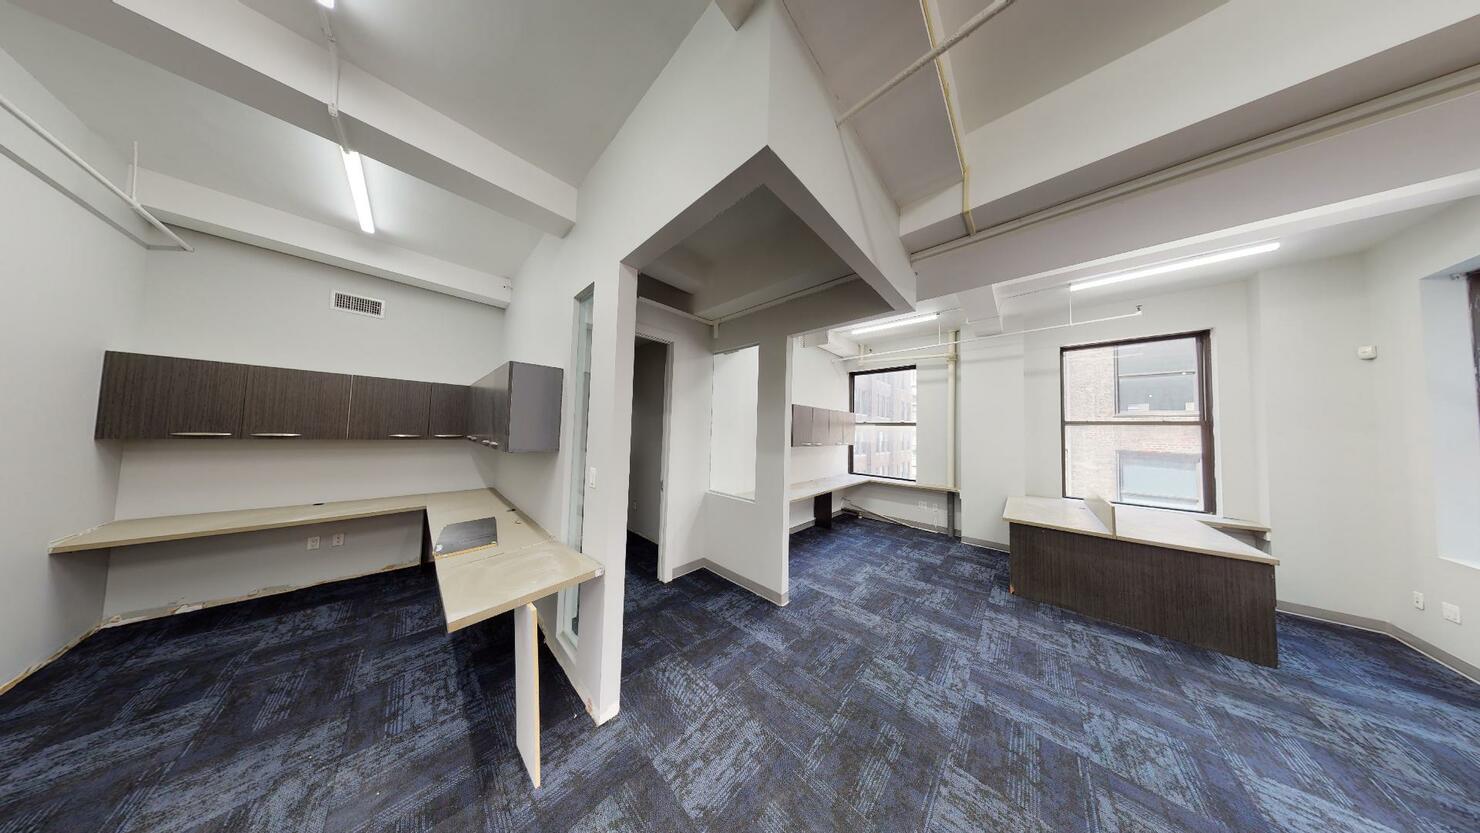 255 West 36th Street Office Space - Bright Empty Office Room